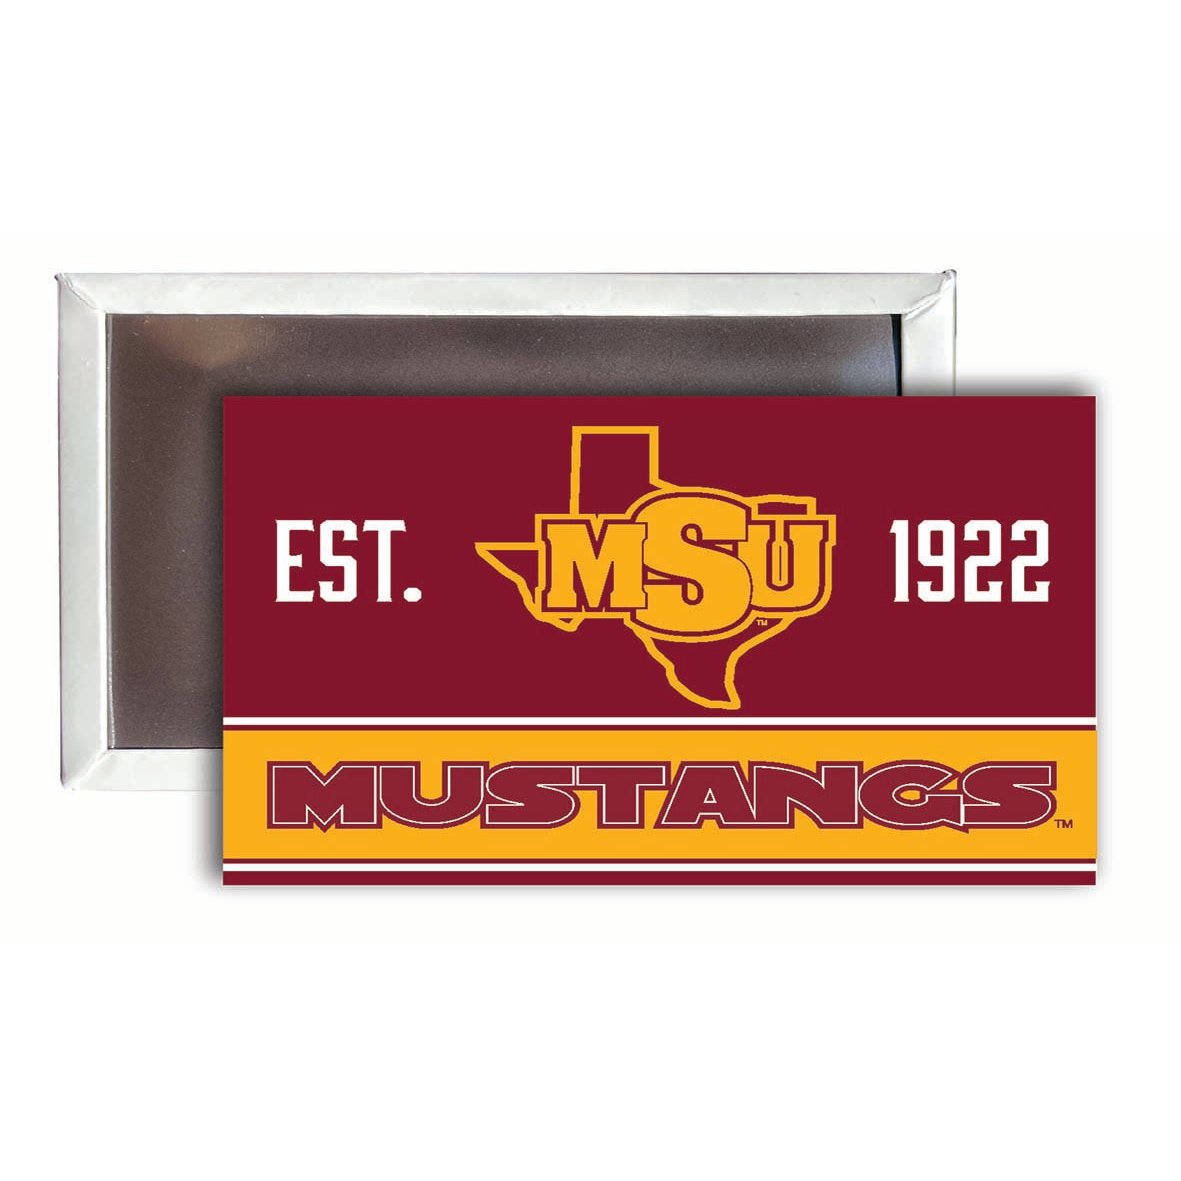 Midwestern State University Mustangs 2x3-Inch Fridge Magnet 4-Pack